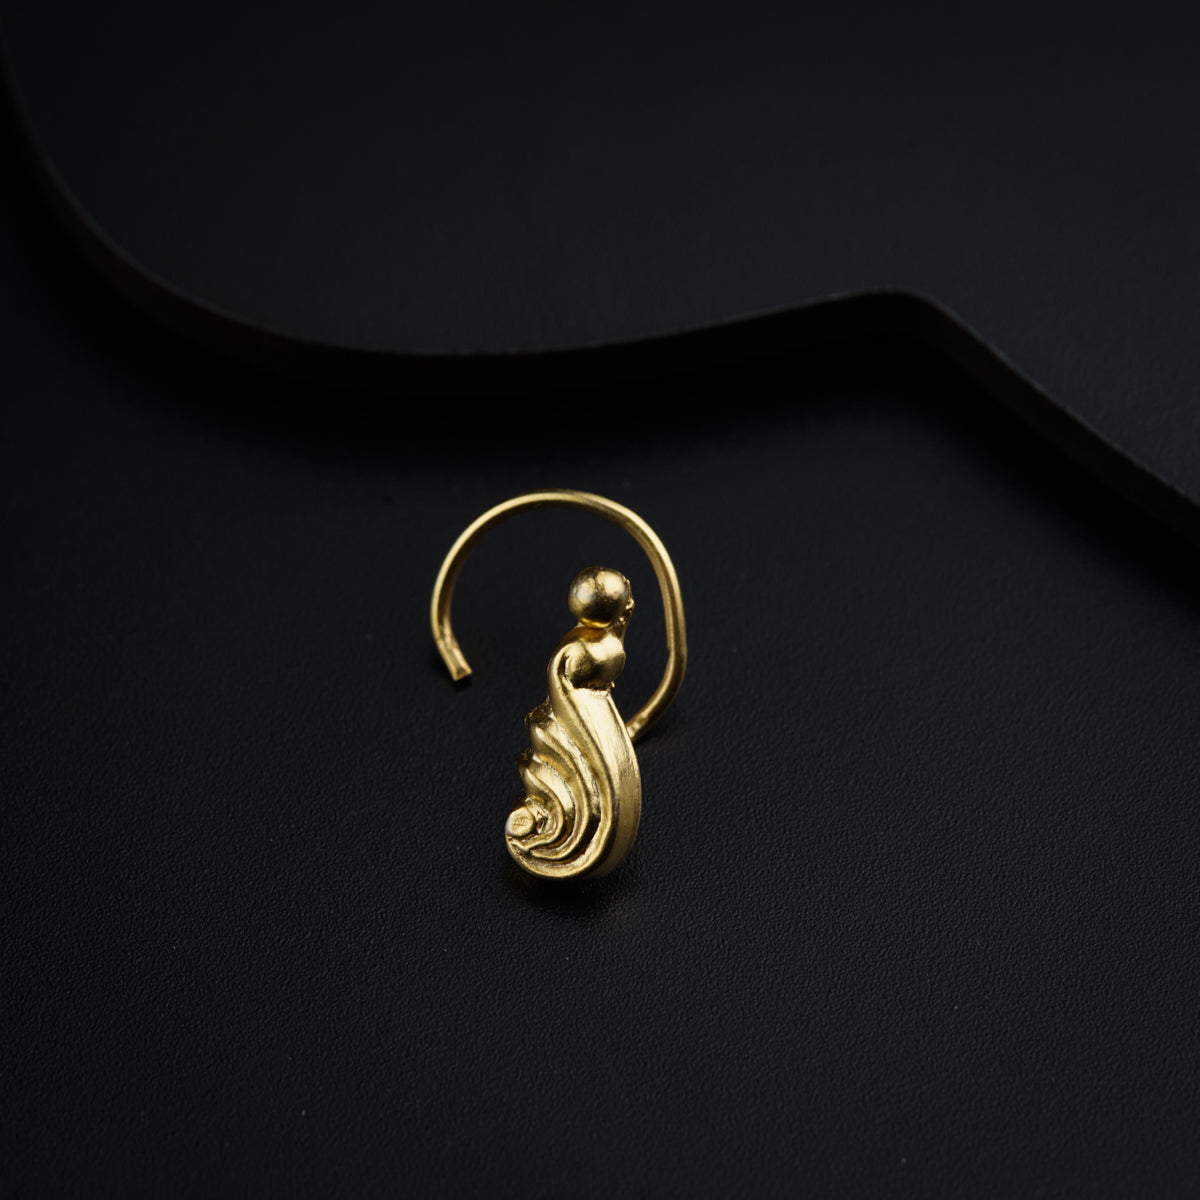 a close up of a gold earring on a black surface